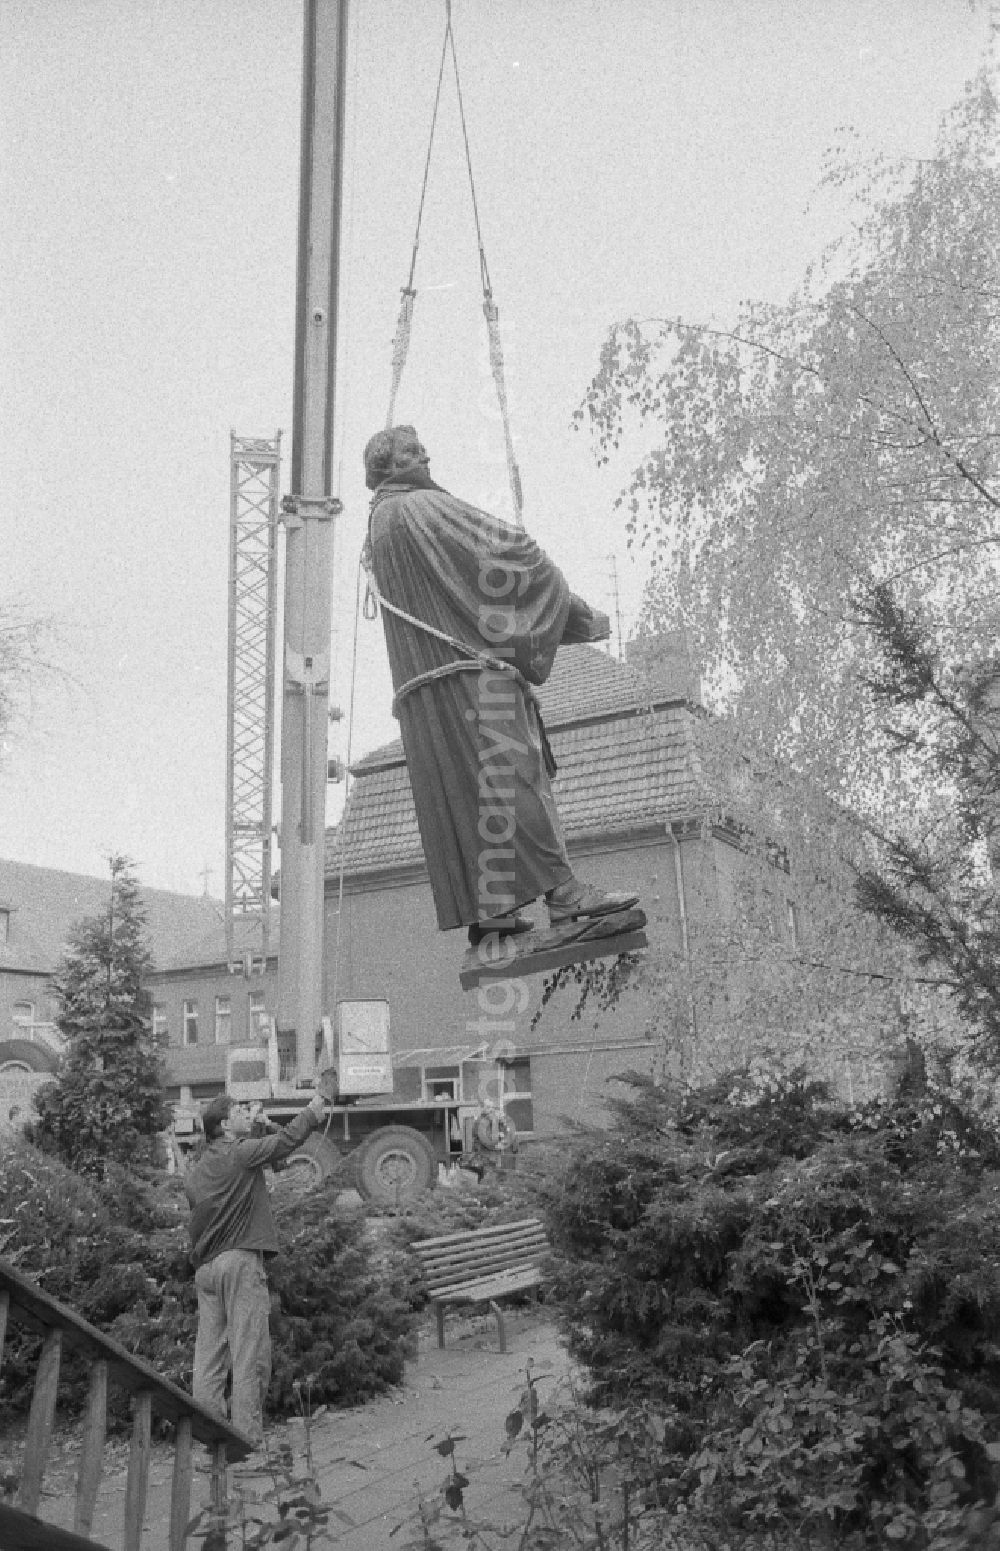 Berlin: Sculpture of the Martin Luther Monument during the re-erection on Karl-Liebknecht-Strasse in the Mitte district of East Berlin in the area of the former GDR, German Democratic Republic